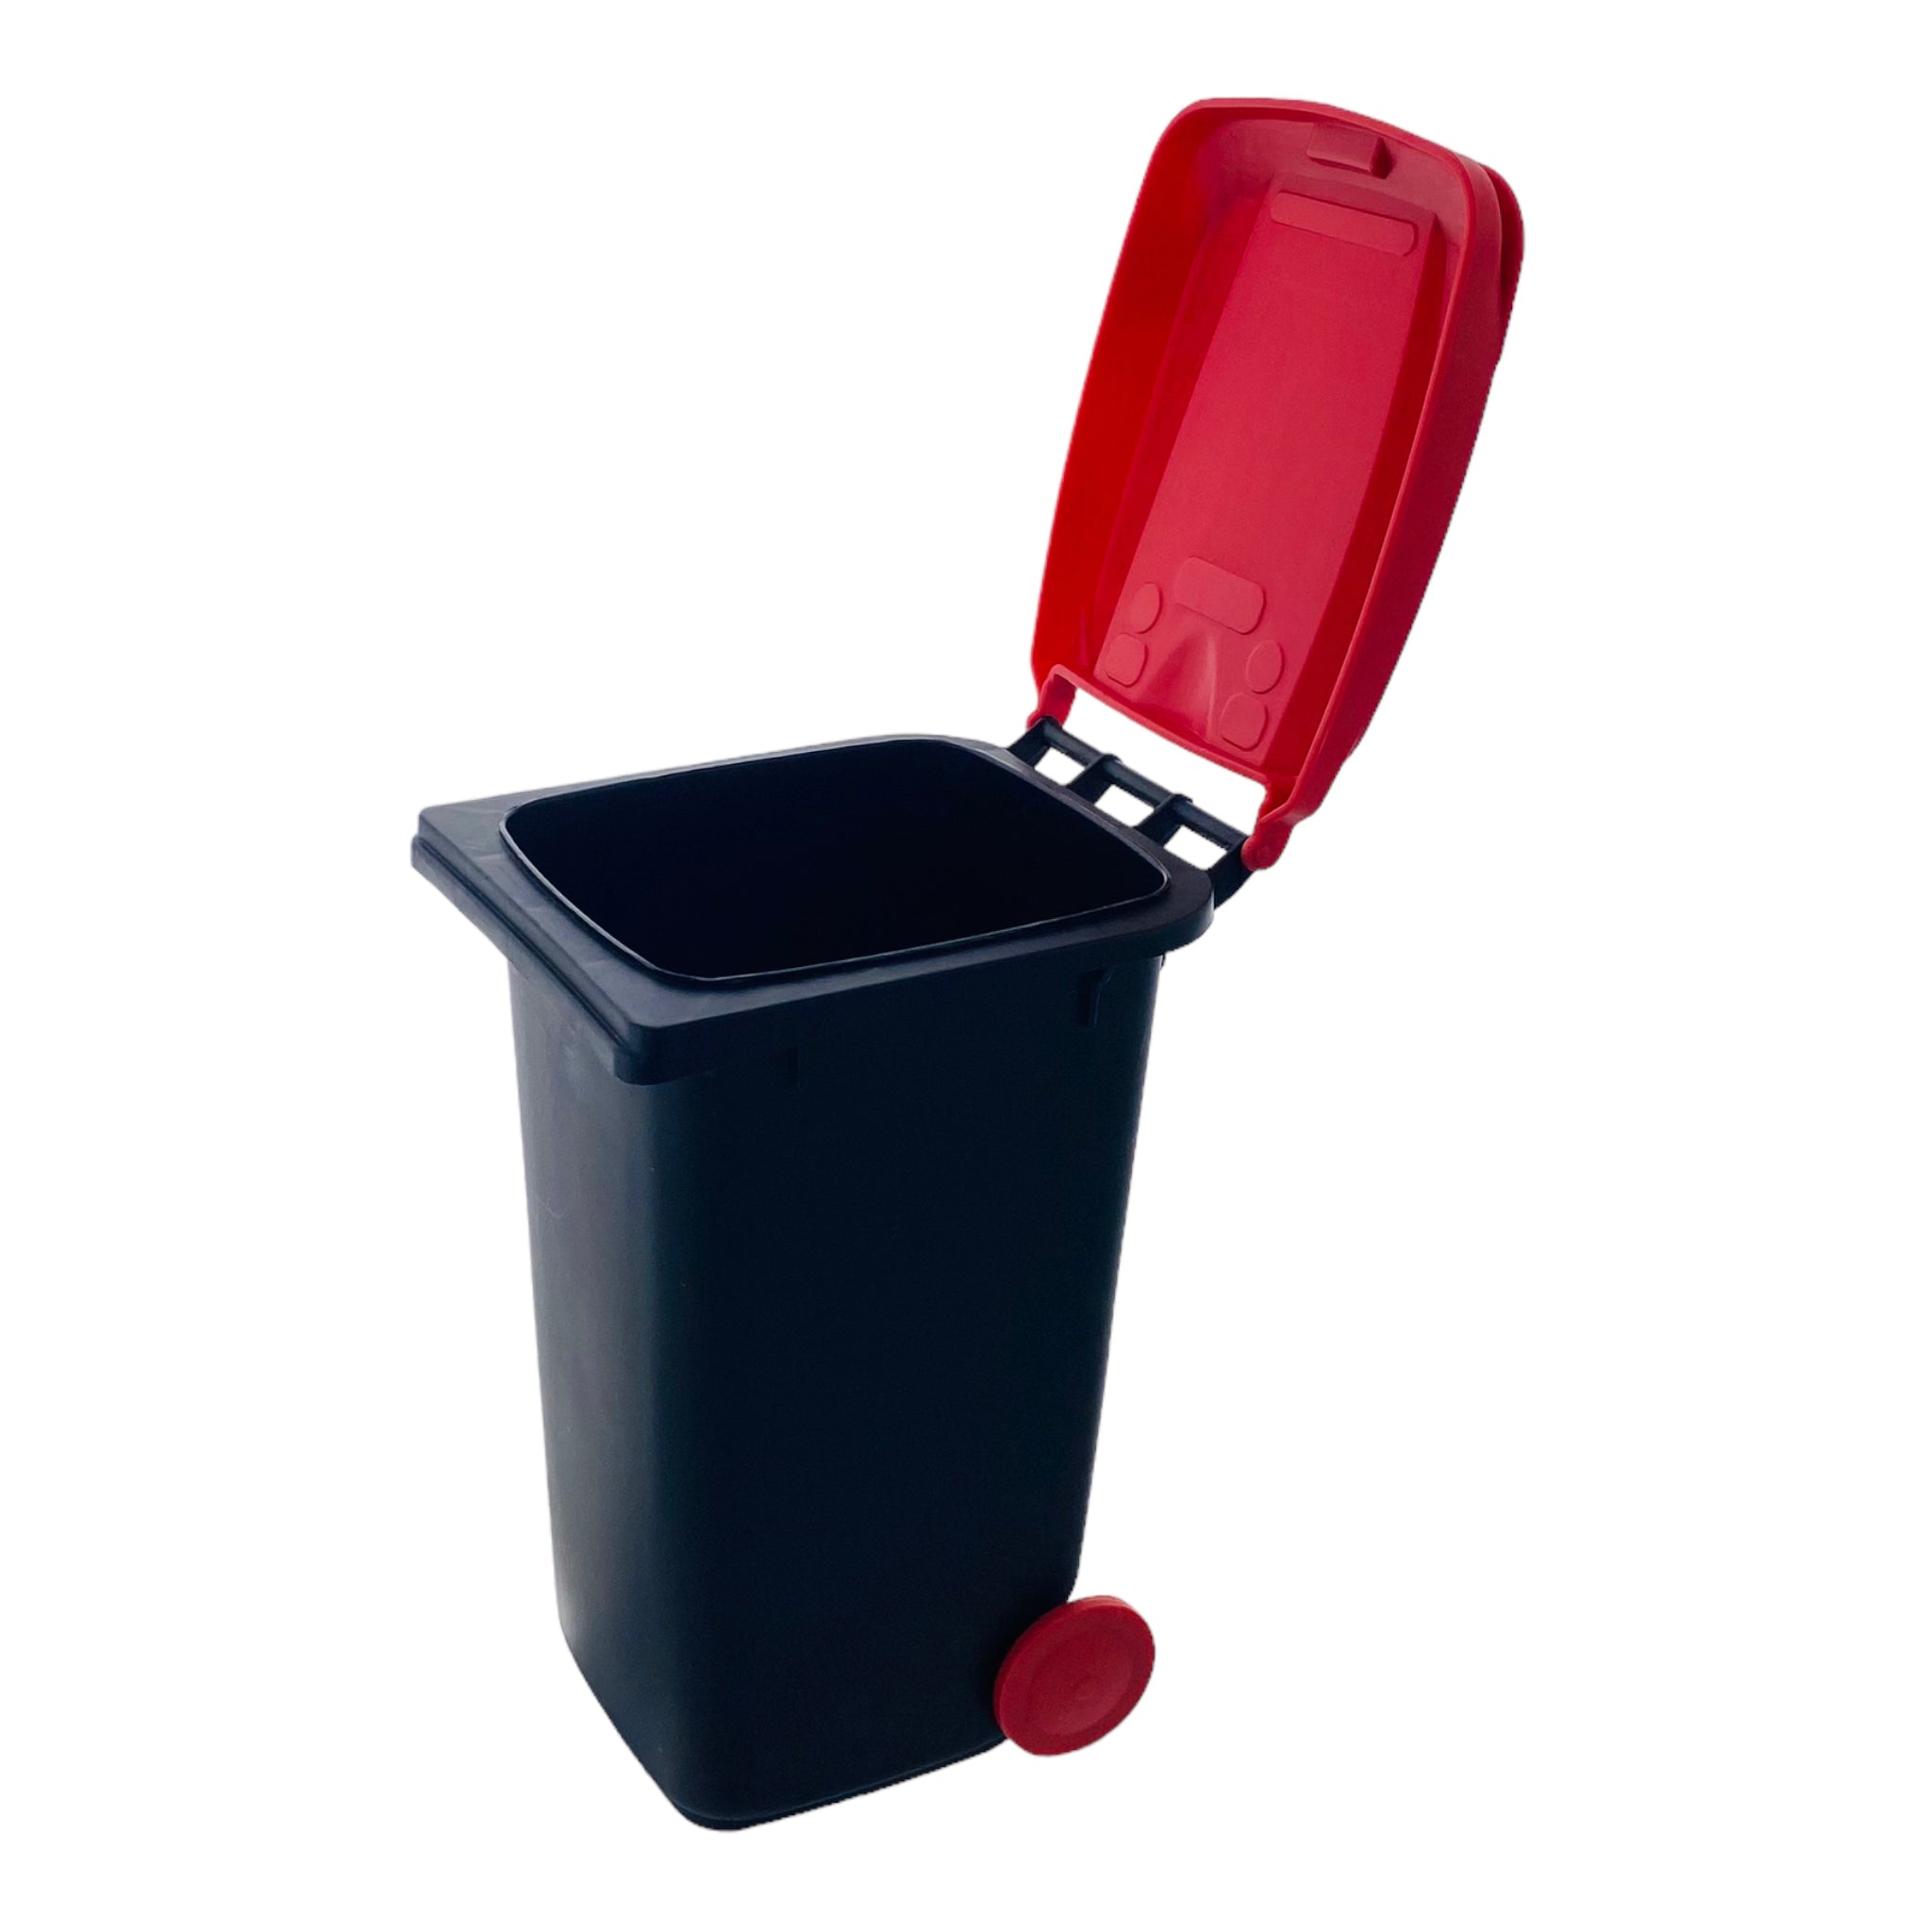 Mini Plastic Garbage Can is the perfect size for easy disposal and keeping your smoking area clean store your used q-tips and stems without taking up too much space